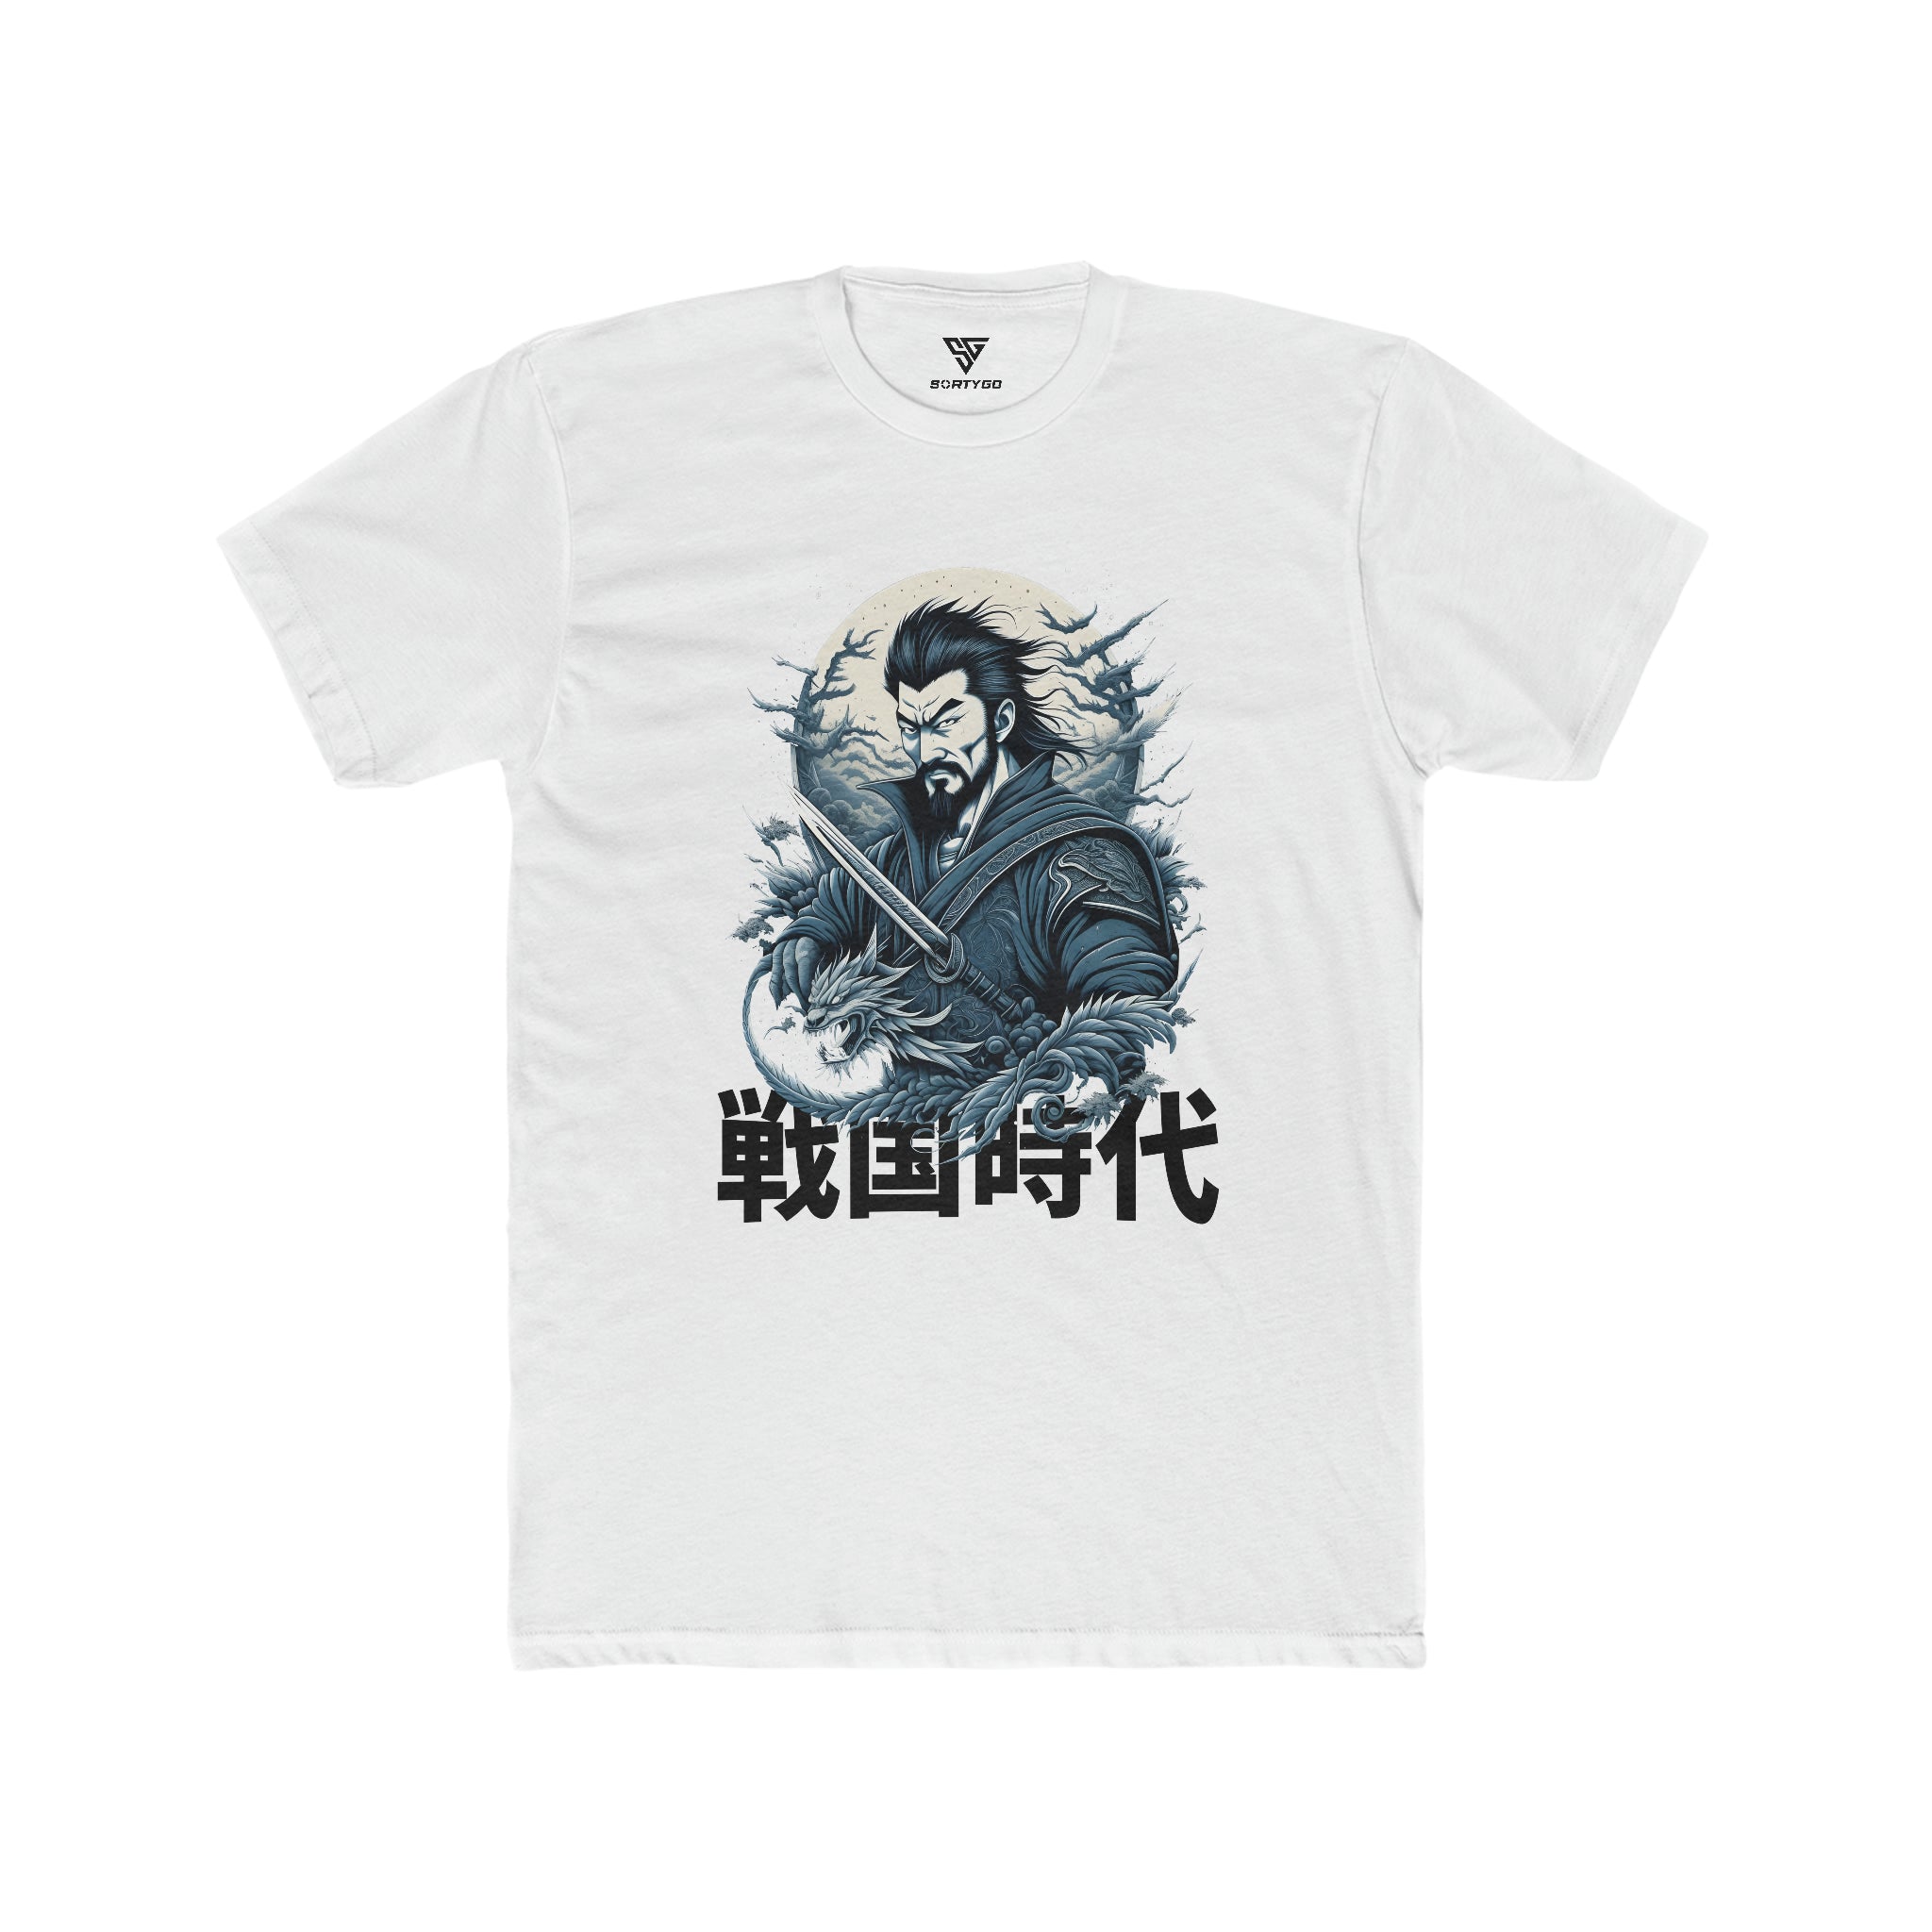 SORTYGO - Japanese Warrior Men Fitted T-Shirt in Solid White